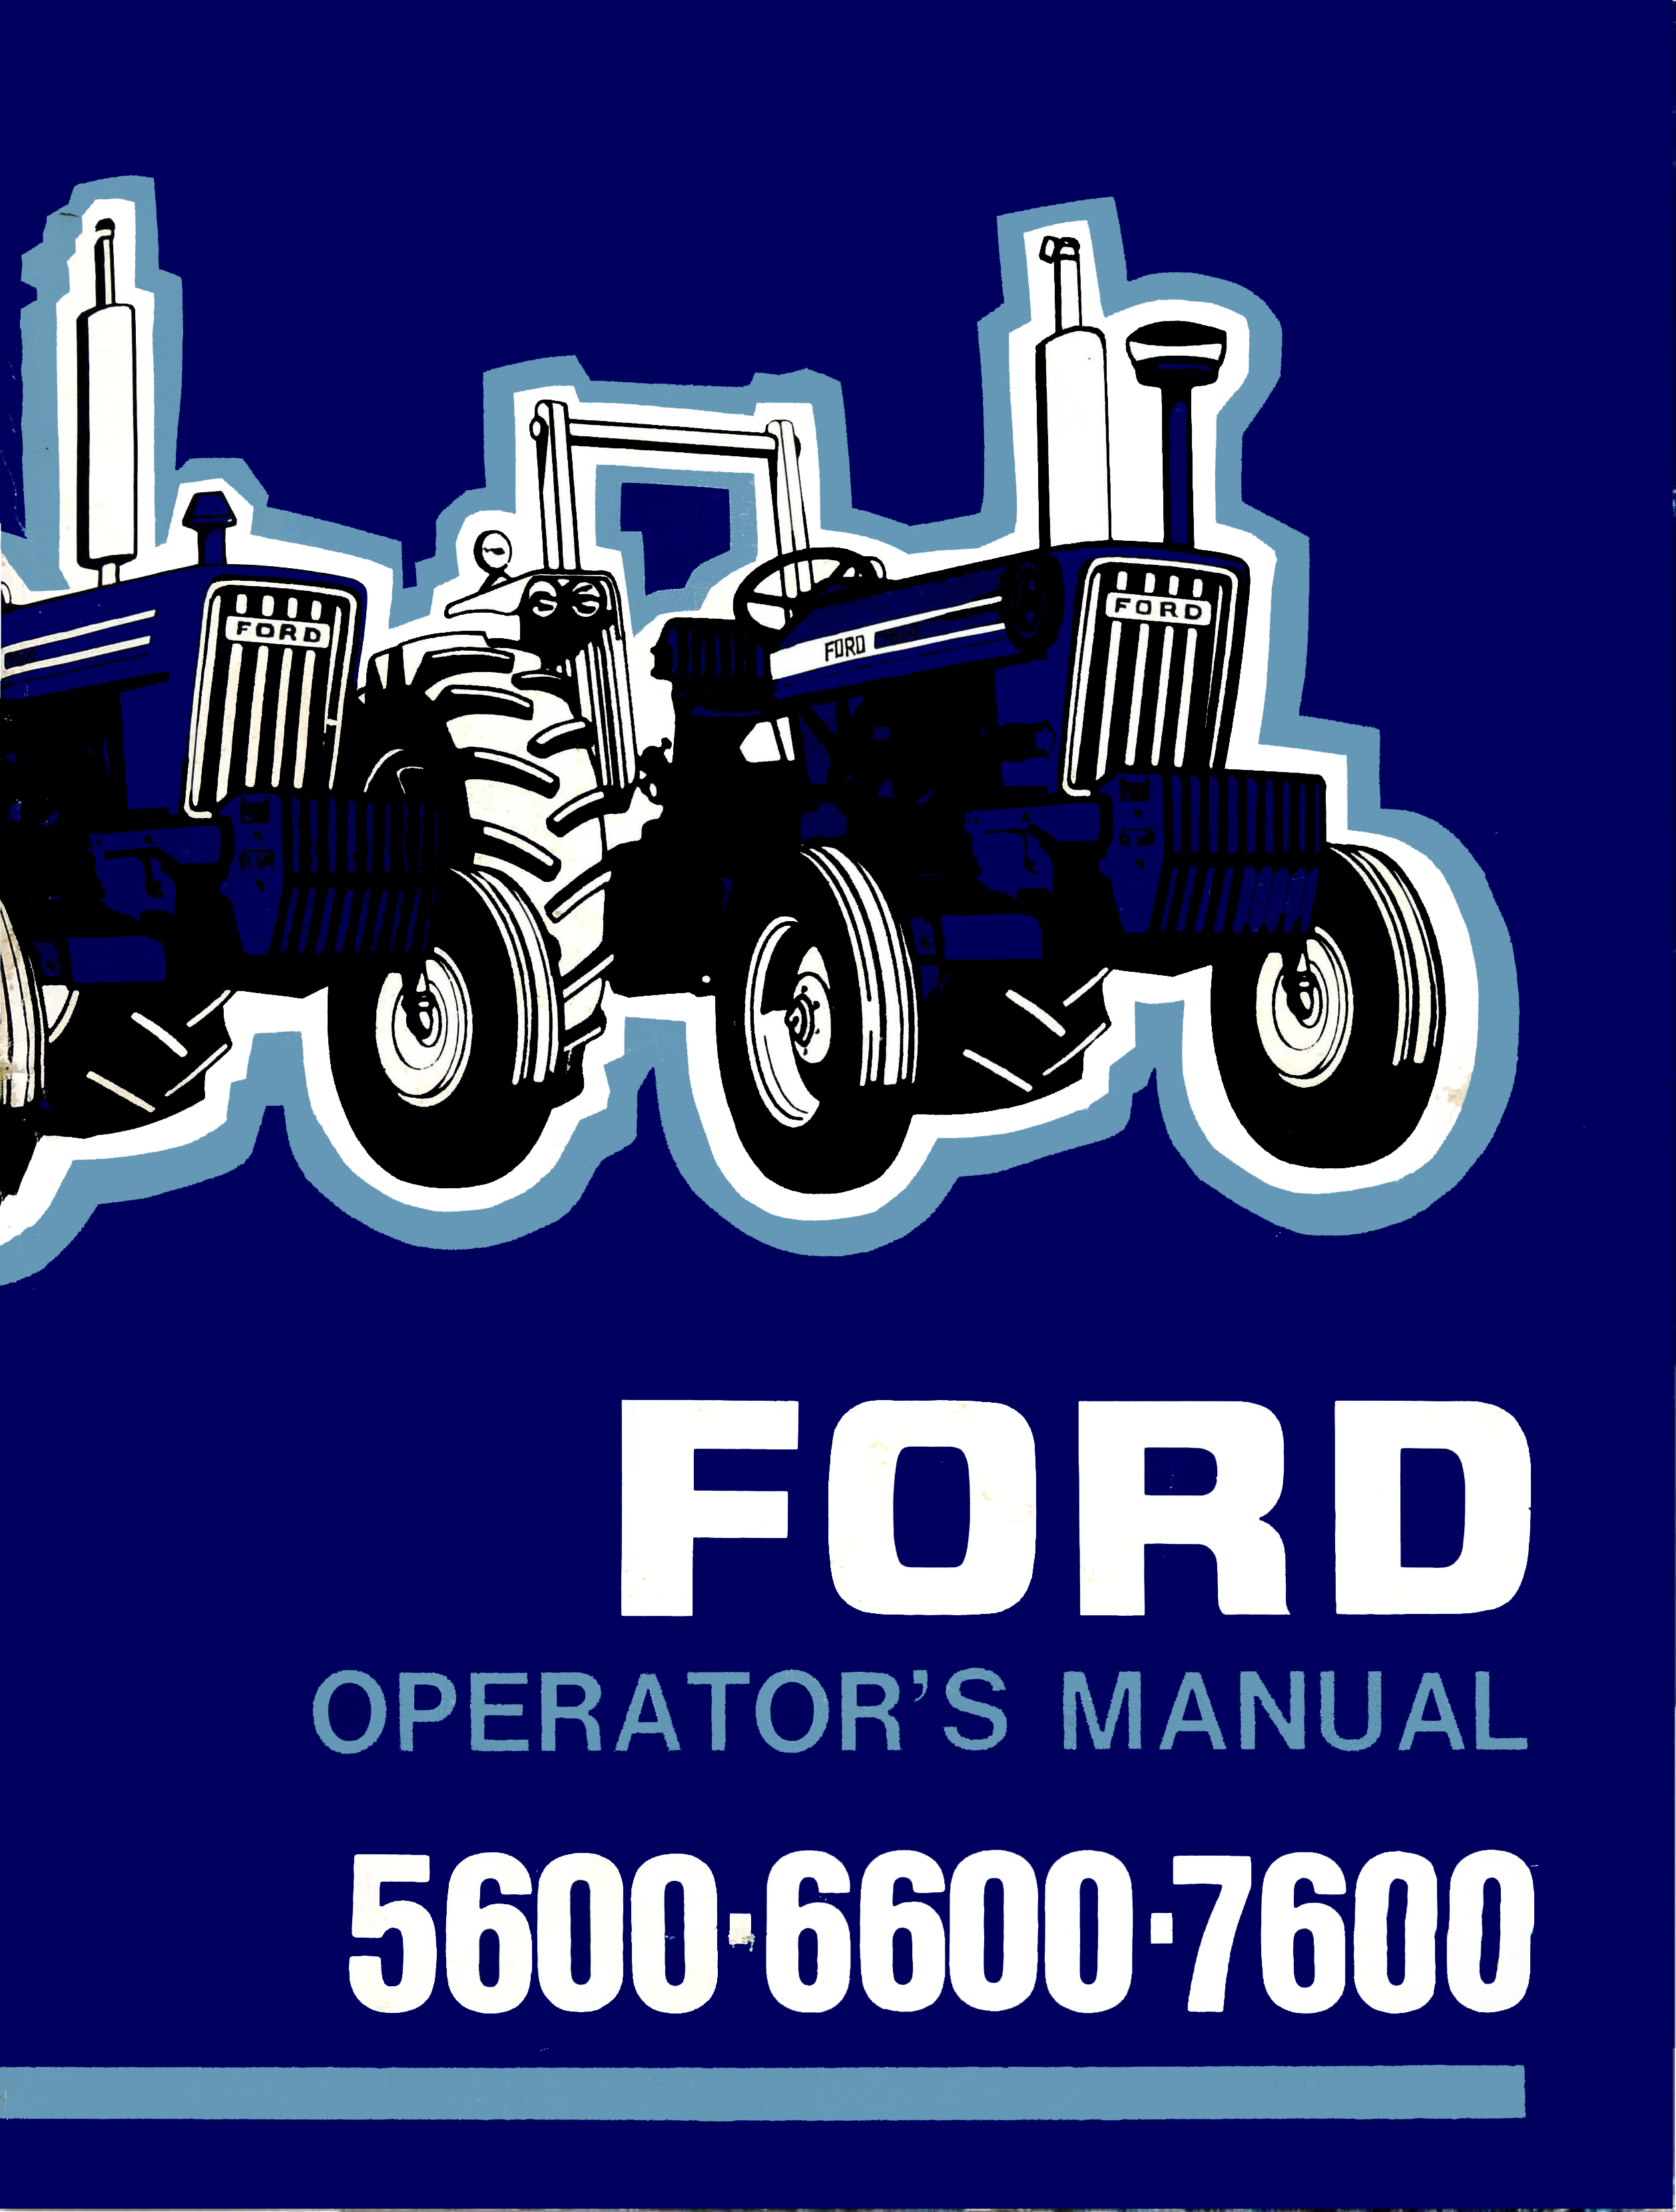 Ford 5600, 6600, 7600 Tractors Operator's Manual